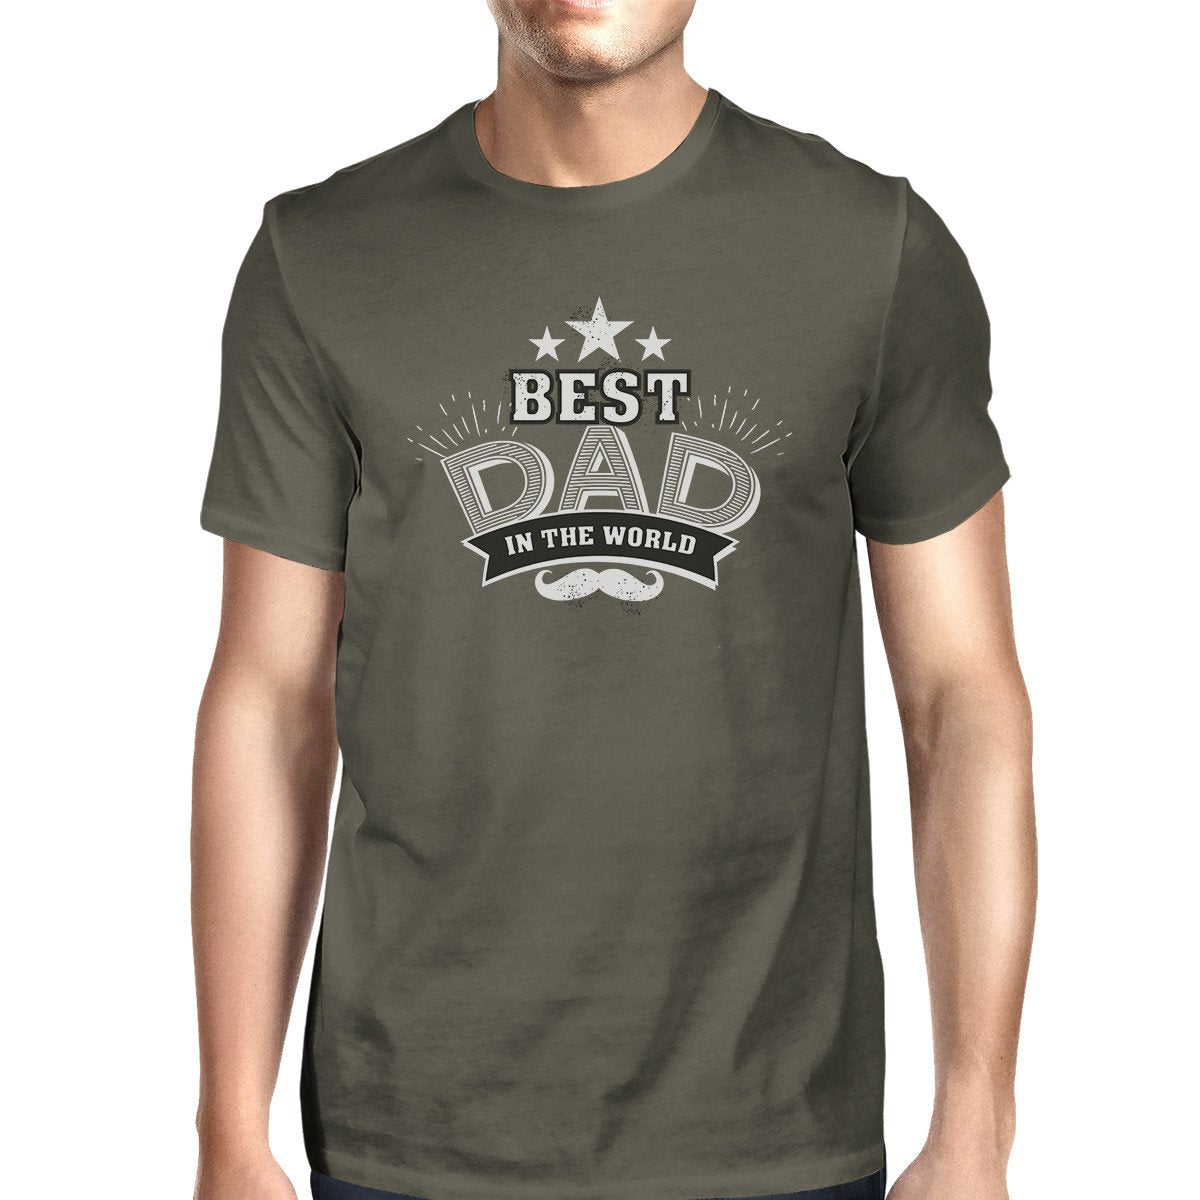 Best Dad In The World Mens Vintage Style Shirt